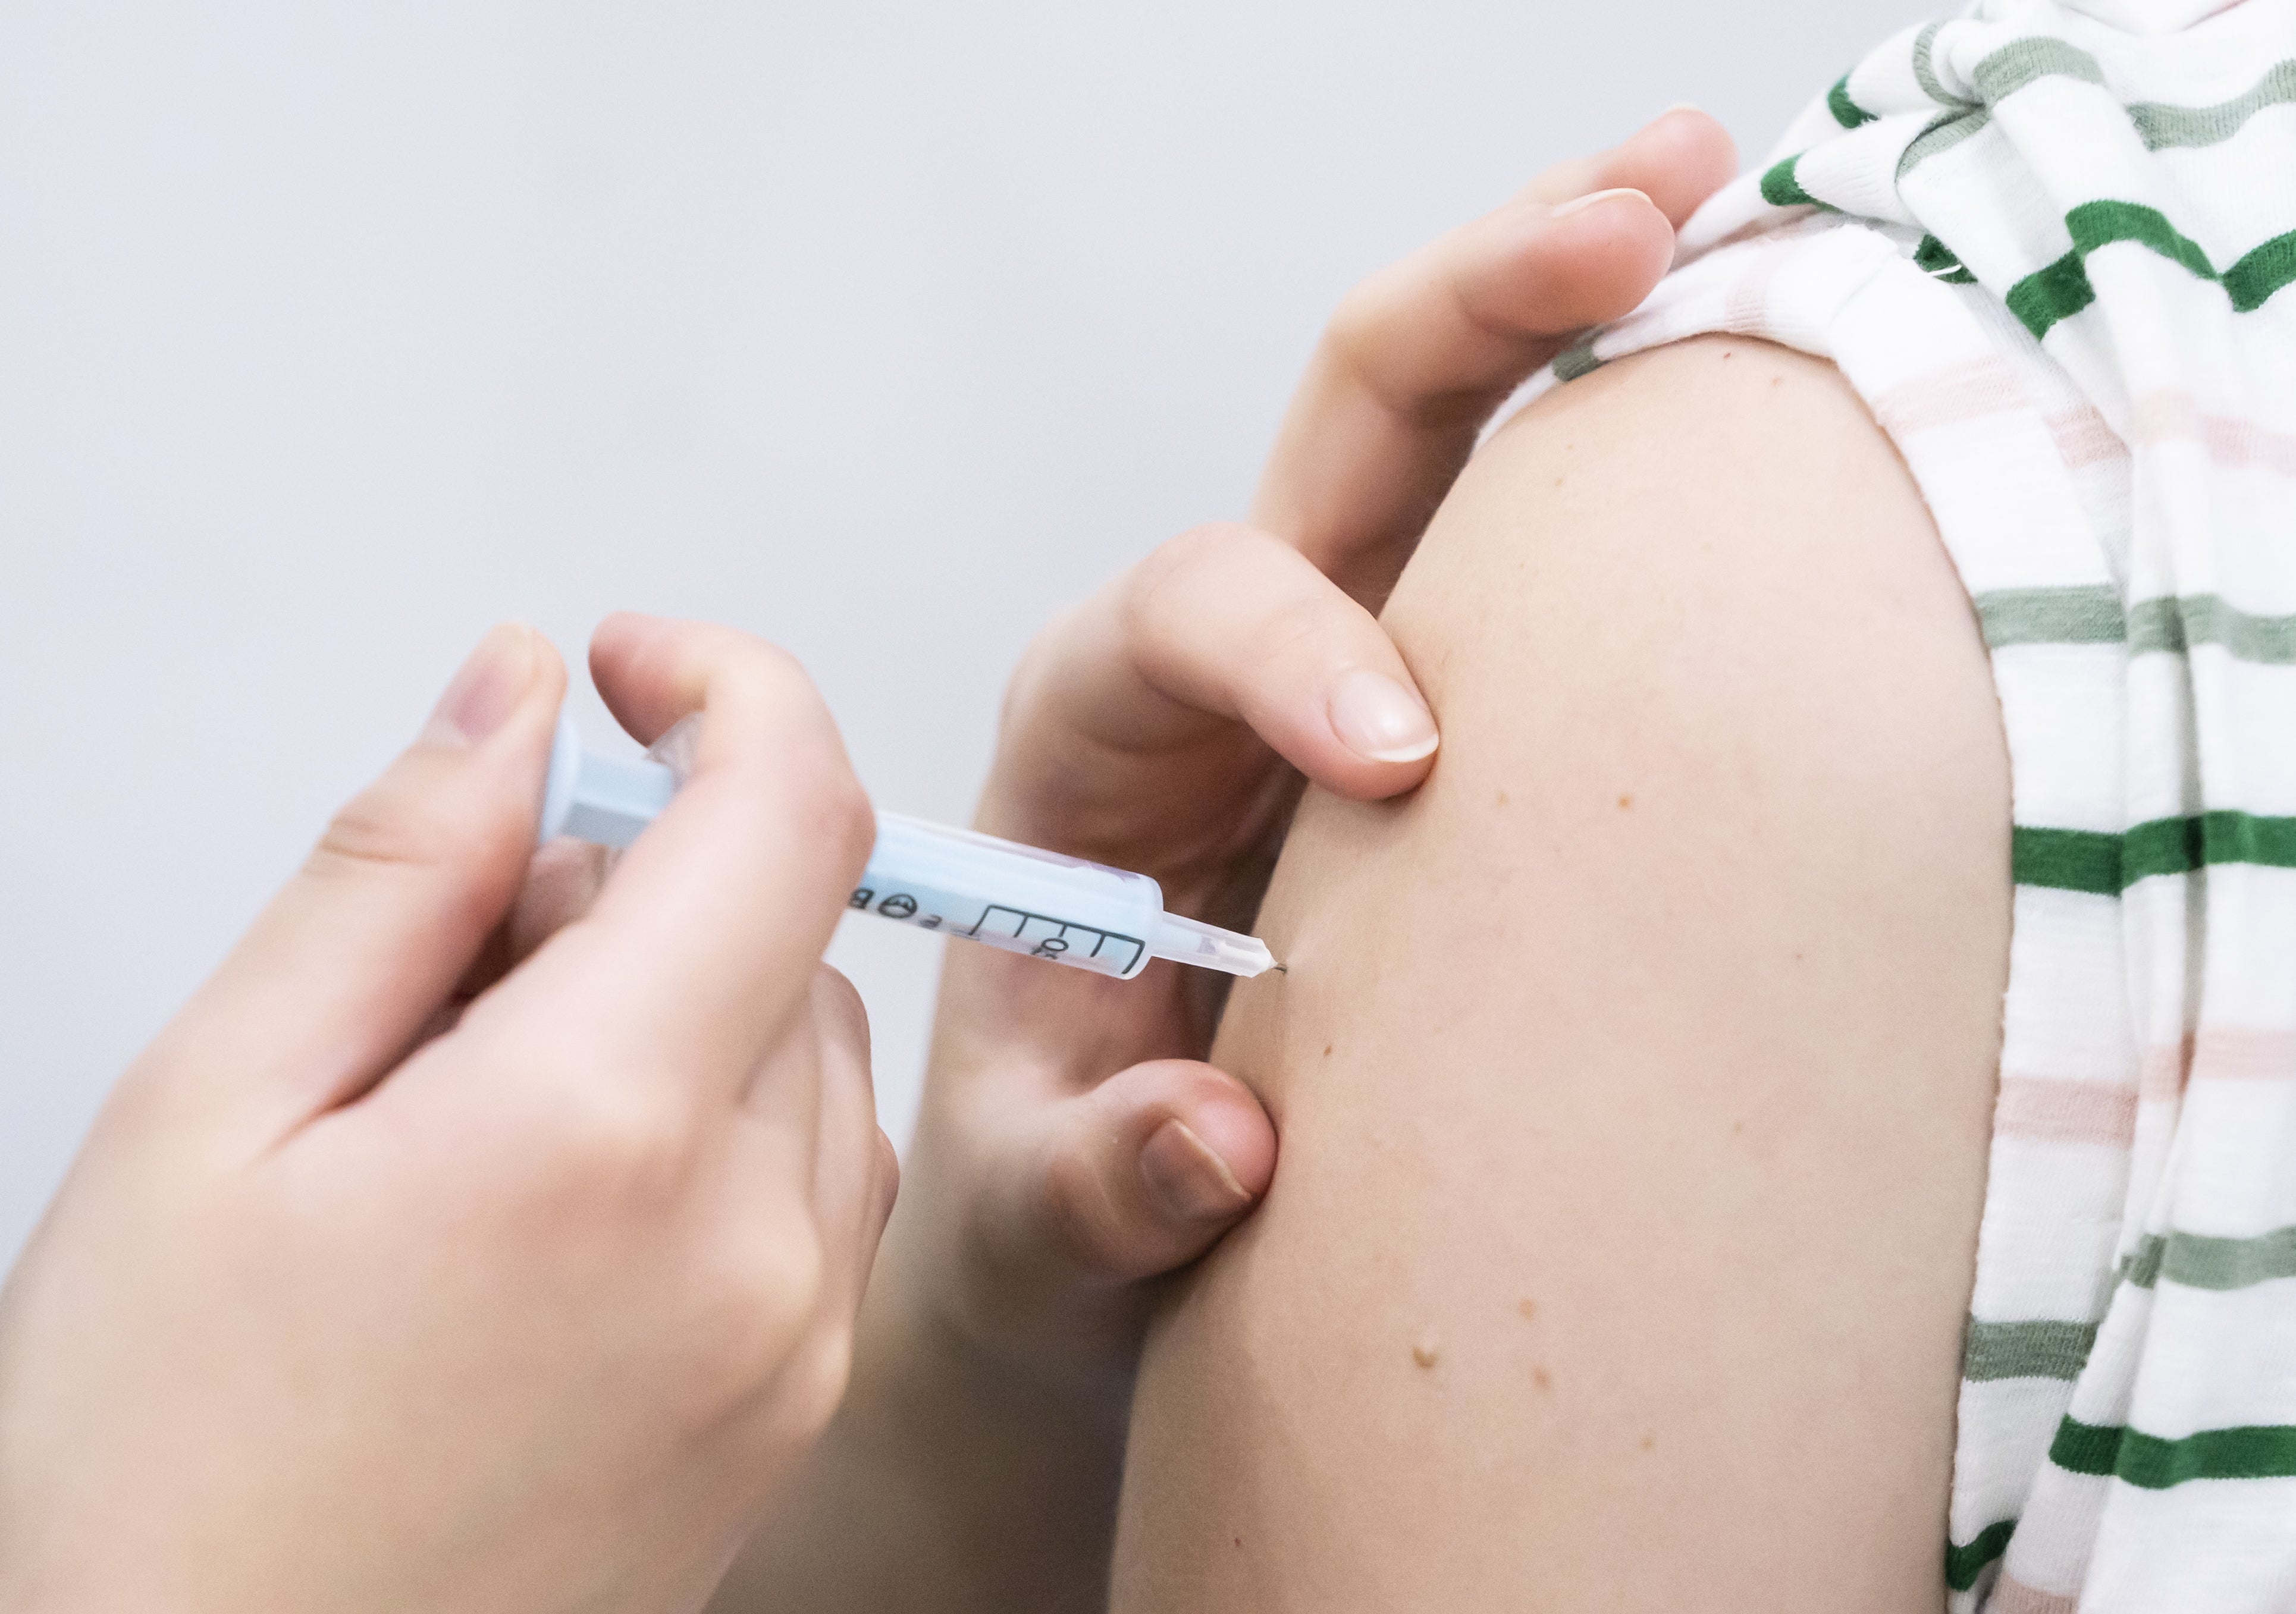 Multivariant Covid-19 vaccine booster shows promise, early trial data suggests (Danny Lawson/PA)